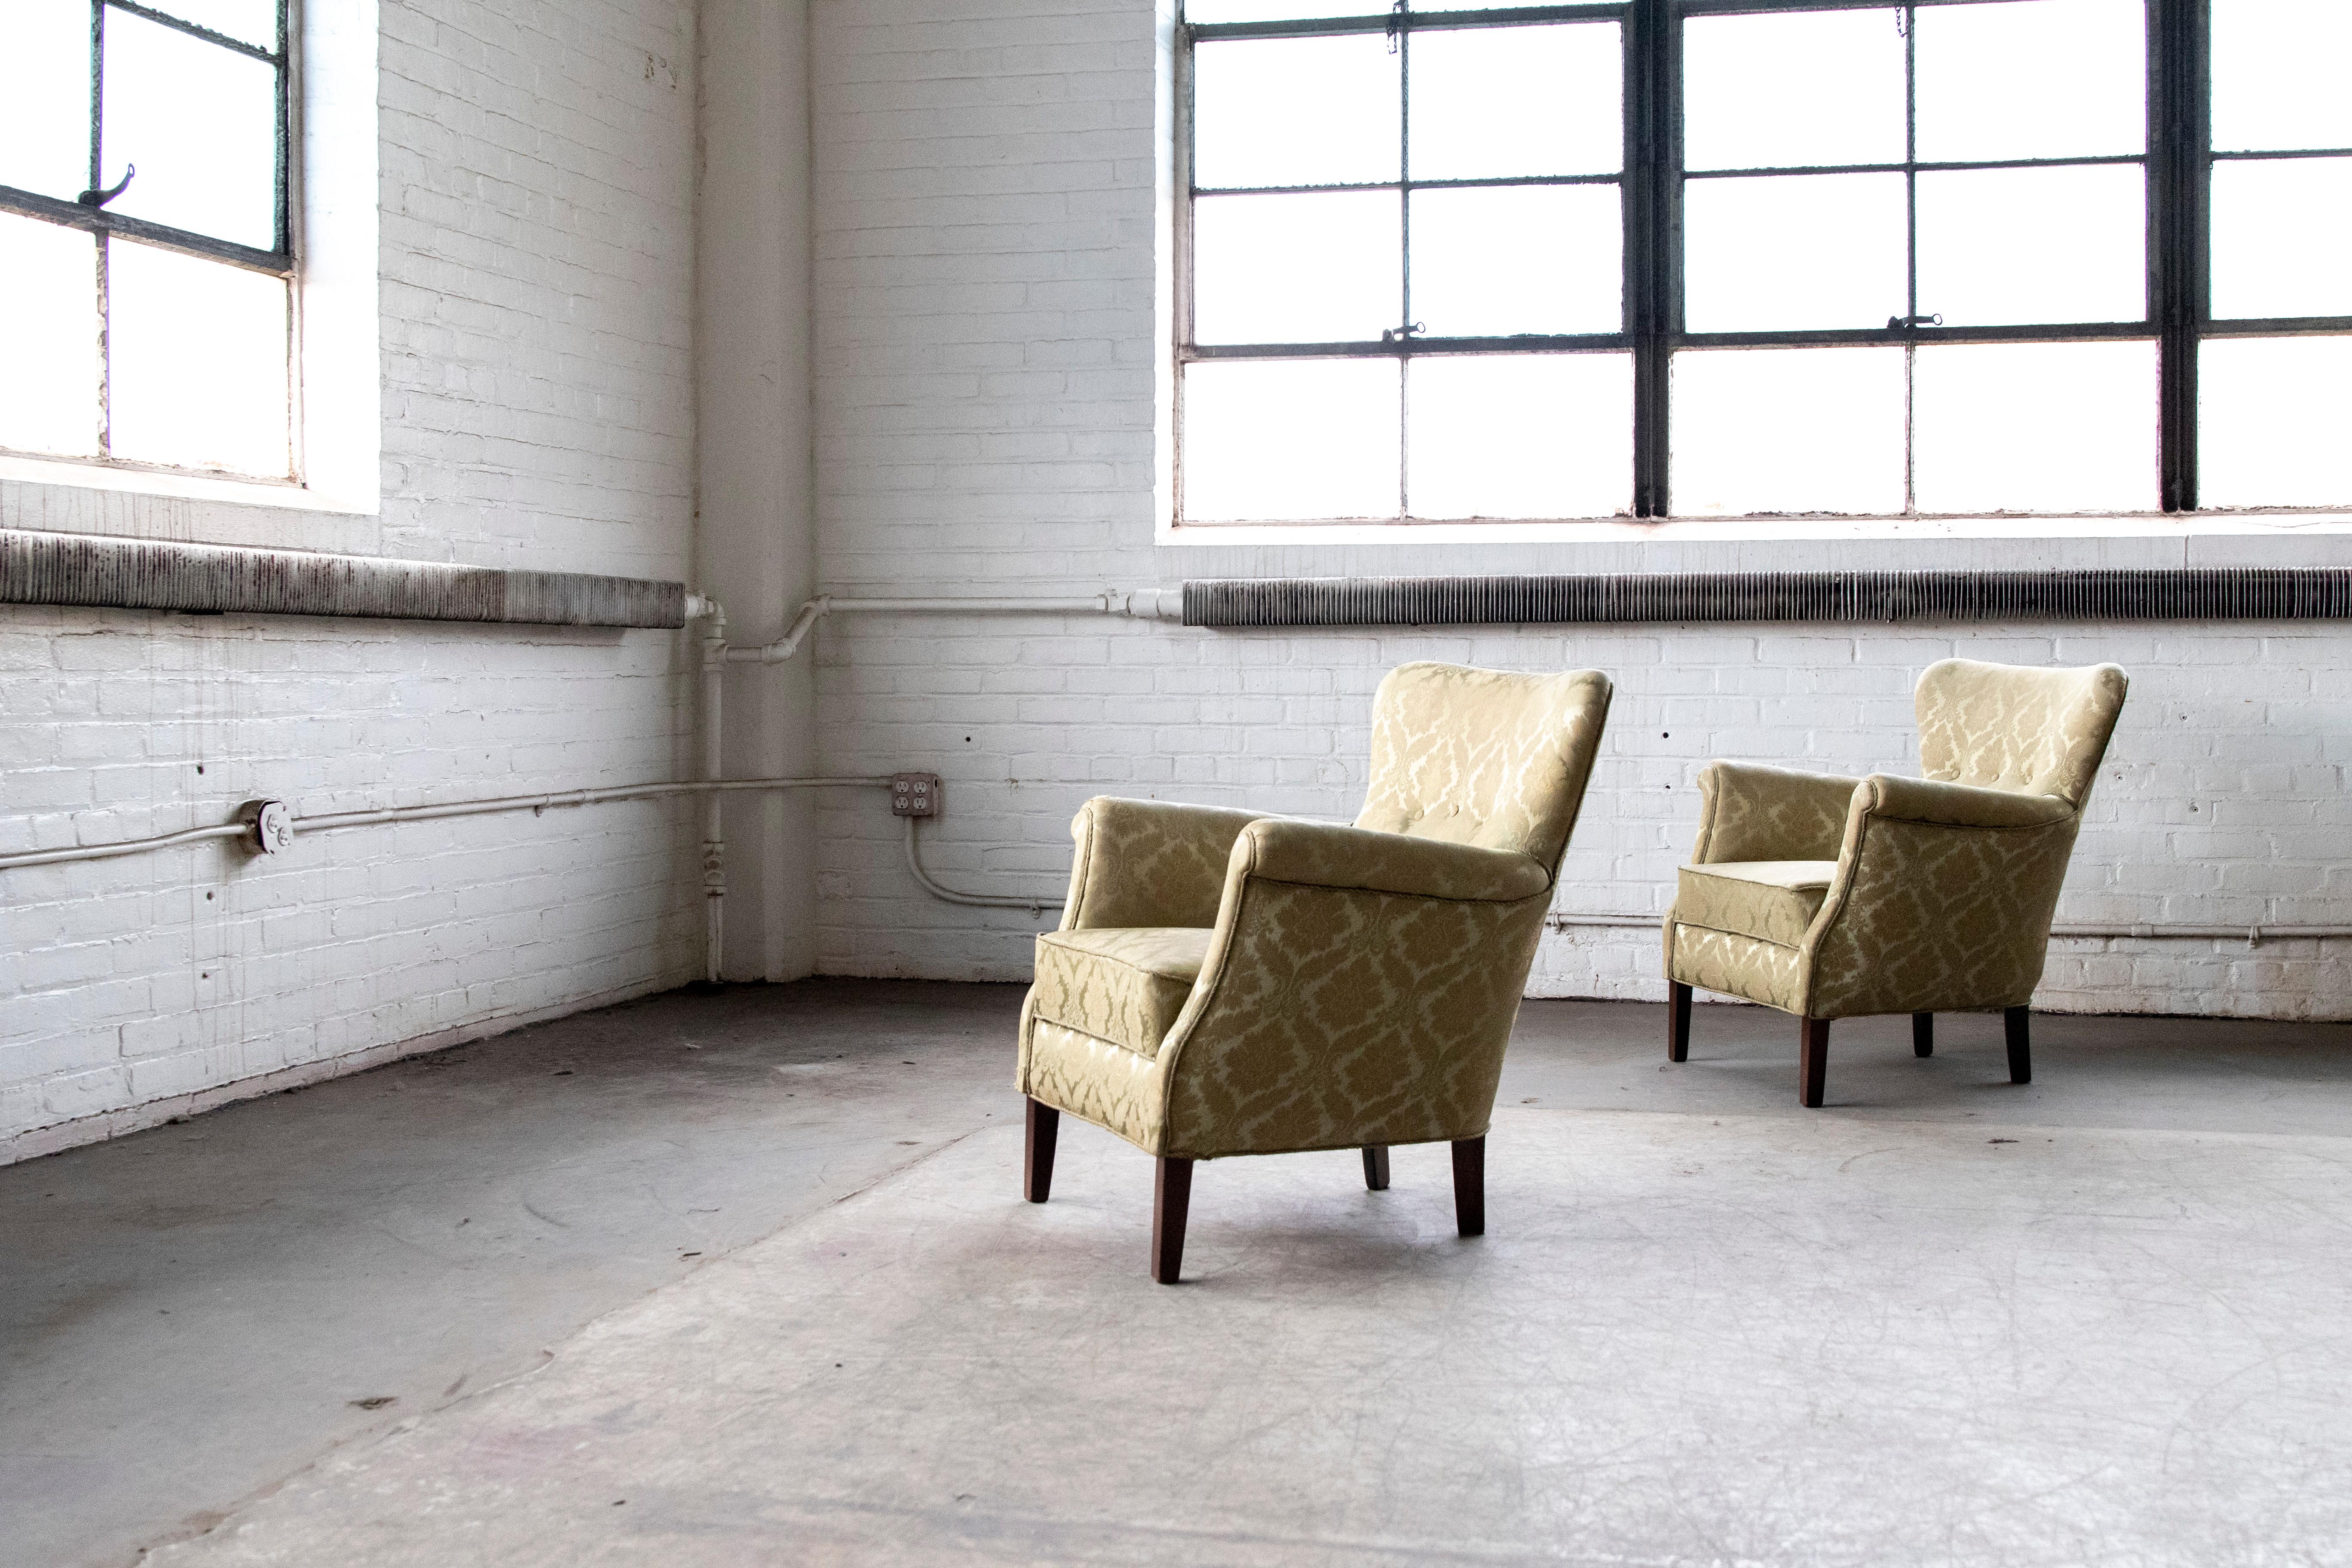 Beautiful pair of 1940s Danish easy chair attributed to Fritz Hansen. Very elegant with their distinct shape, precise lines and harmonious proportions. The size make them very versatile and well suited for today's urban homes. The chairs have been